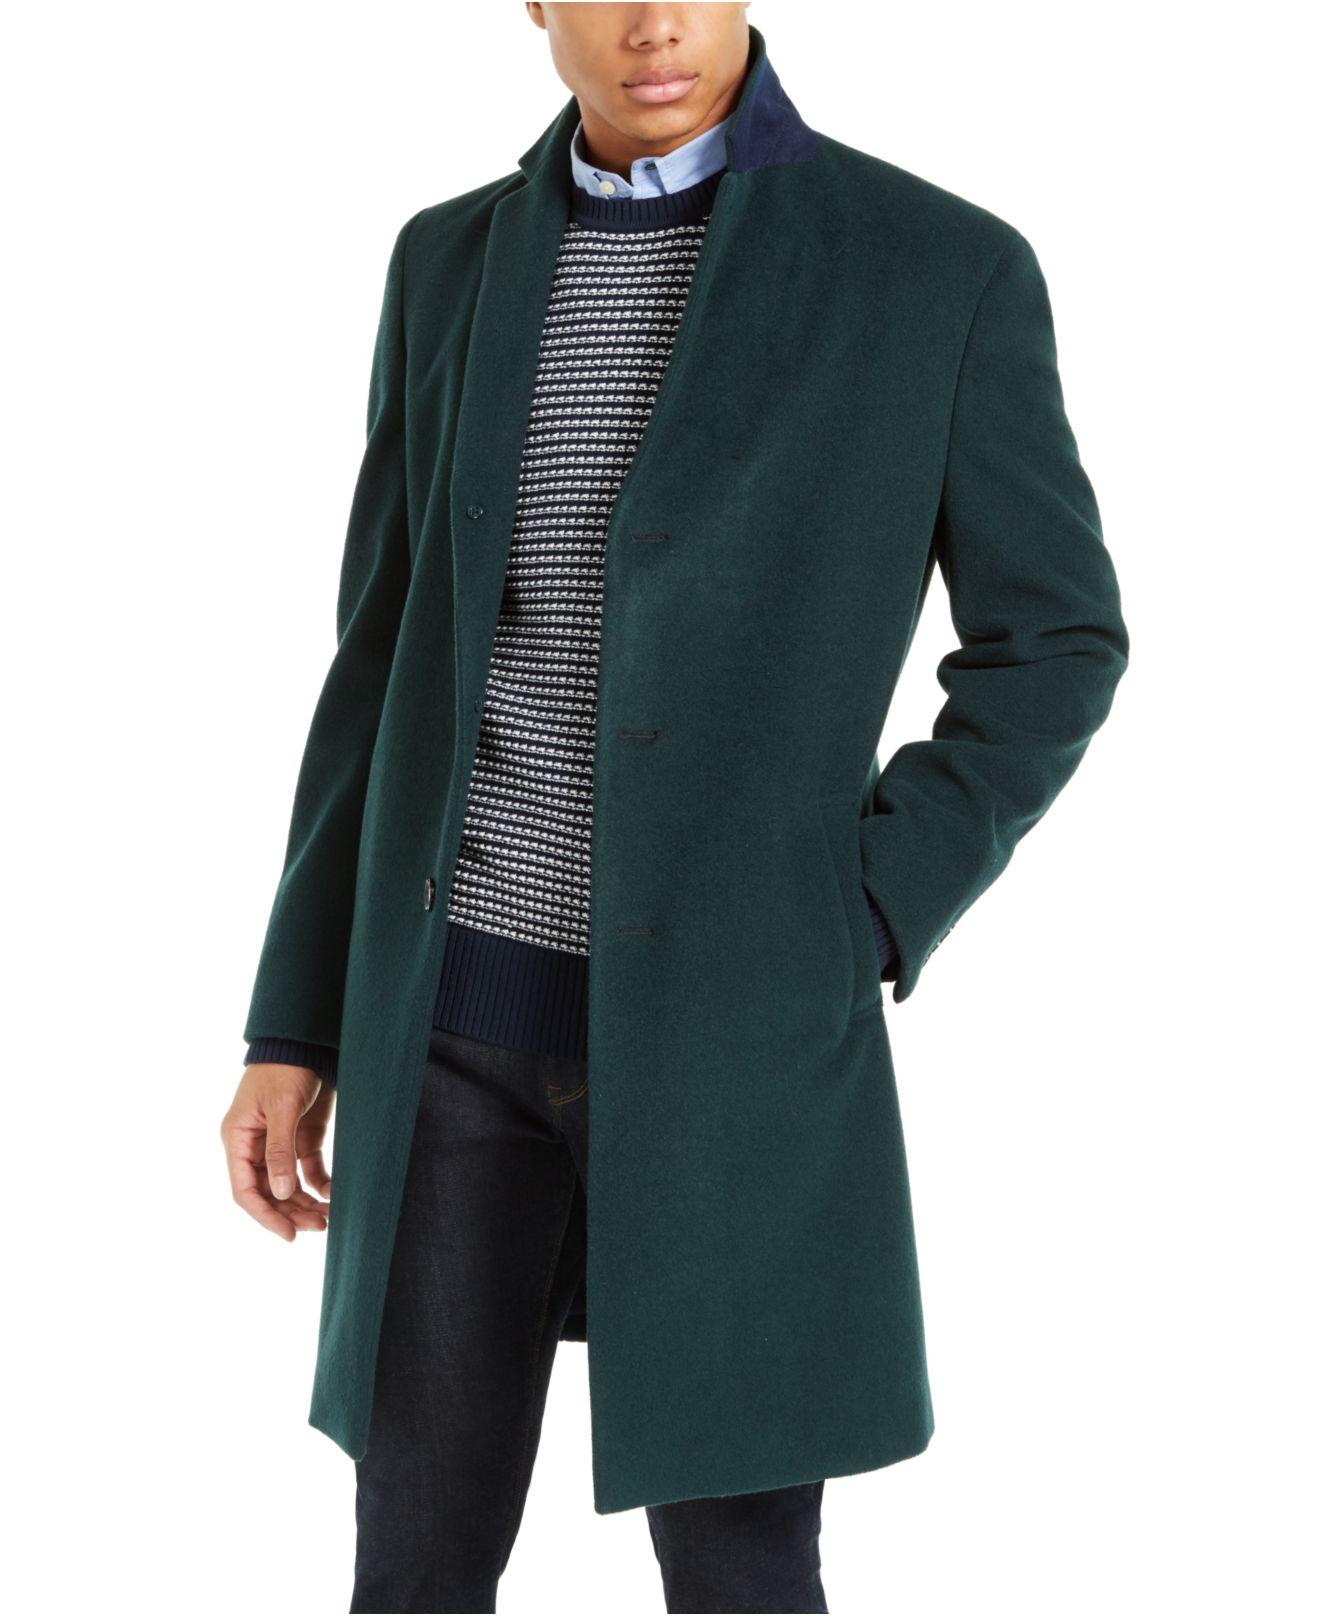 Tommy Hilfiger Addison Wool-blend Trim Fit Overcoat in Forest Green (Green)  for Men - Lyst